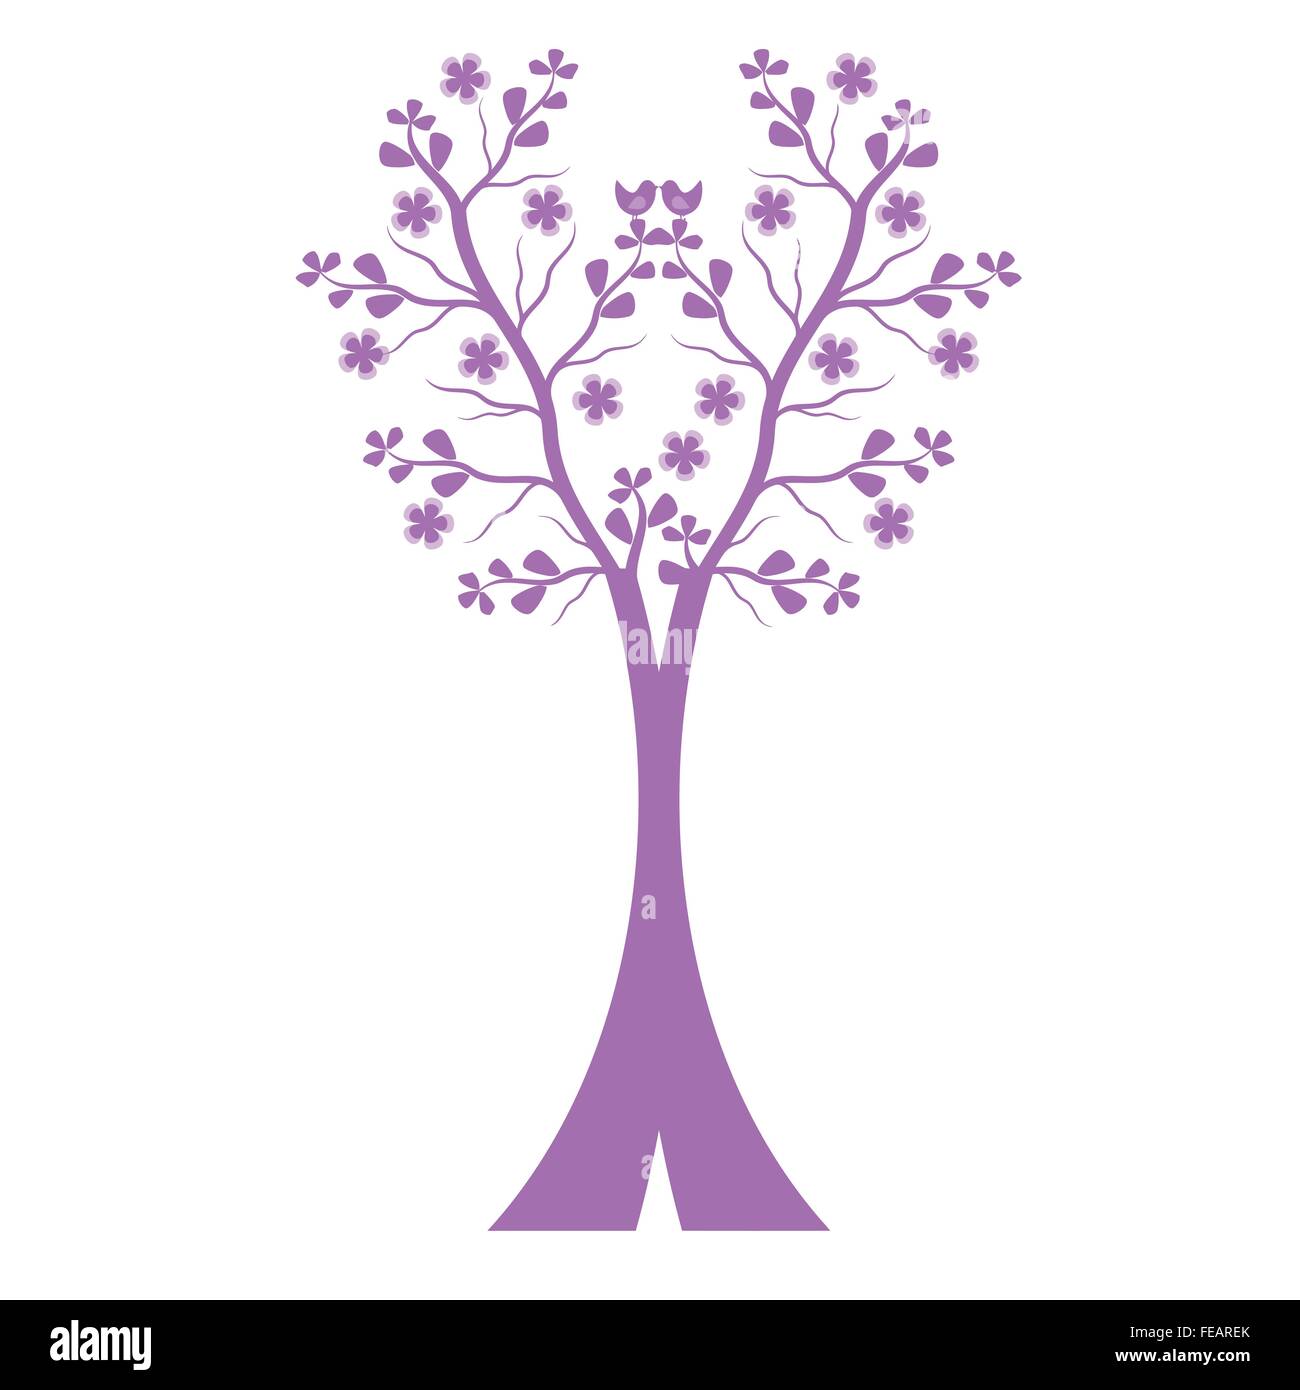 Art tree silhouette isolated on white background Stock Vector